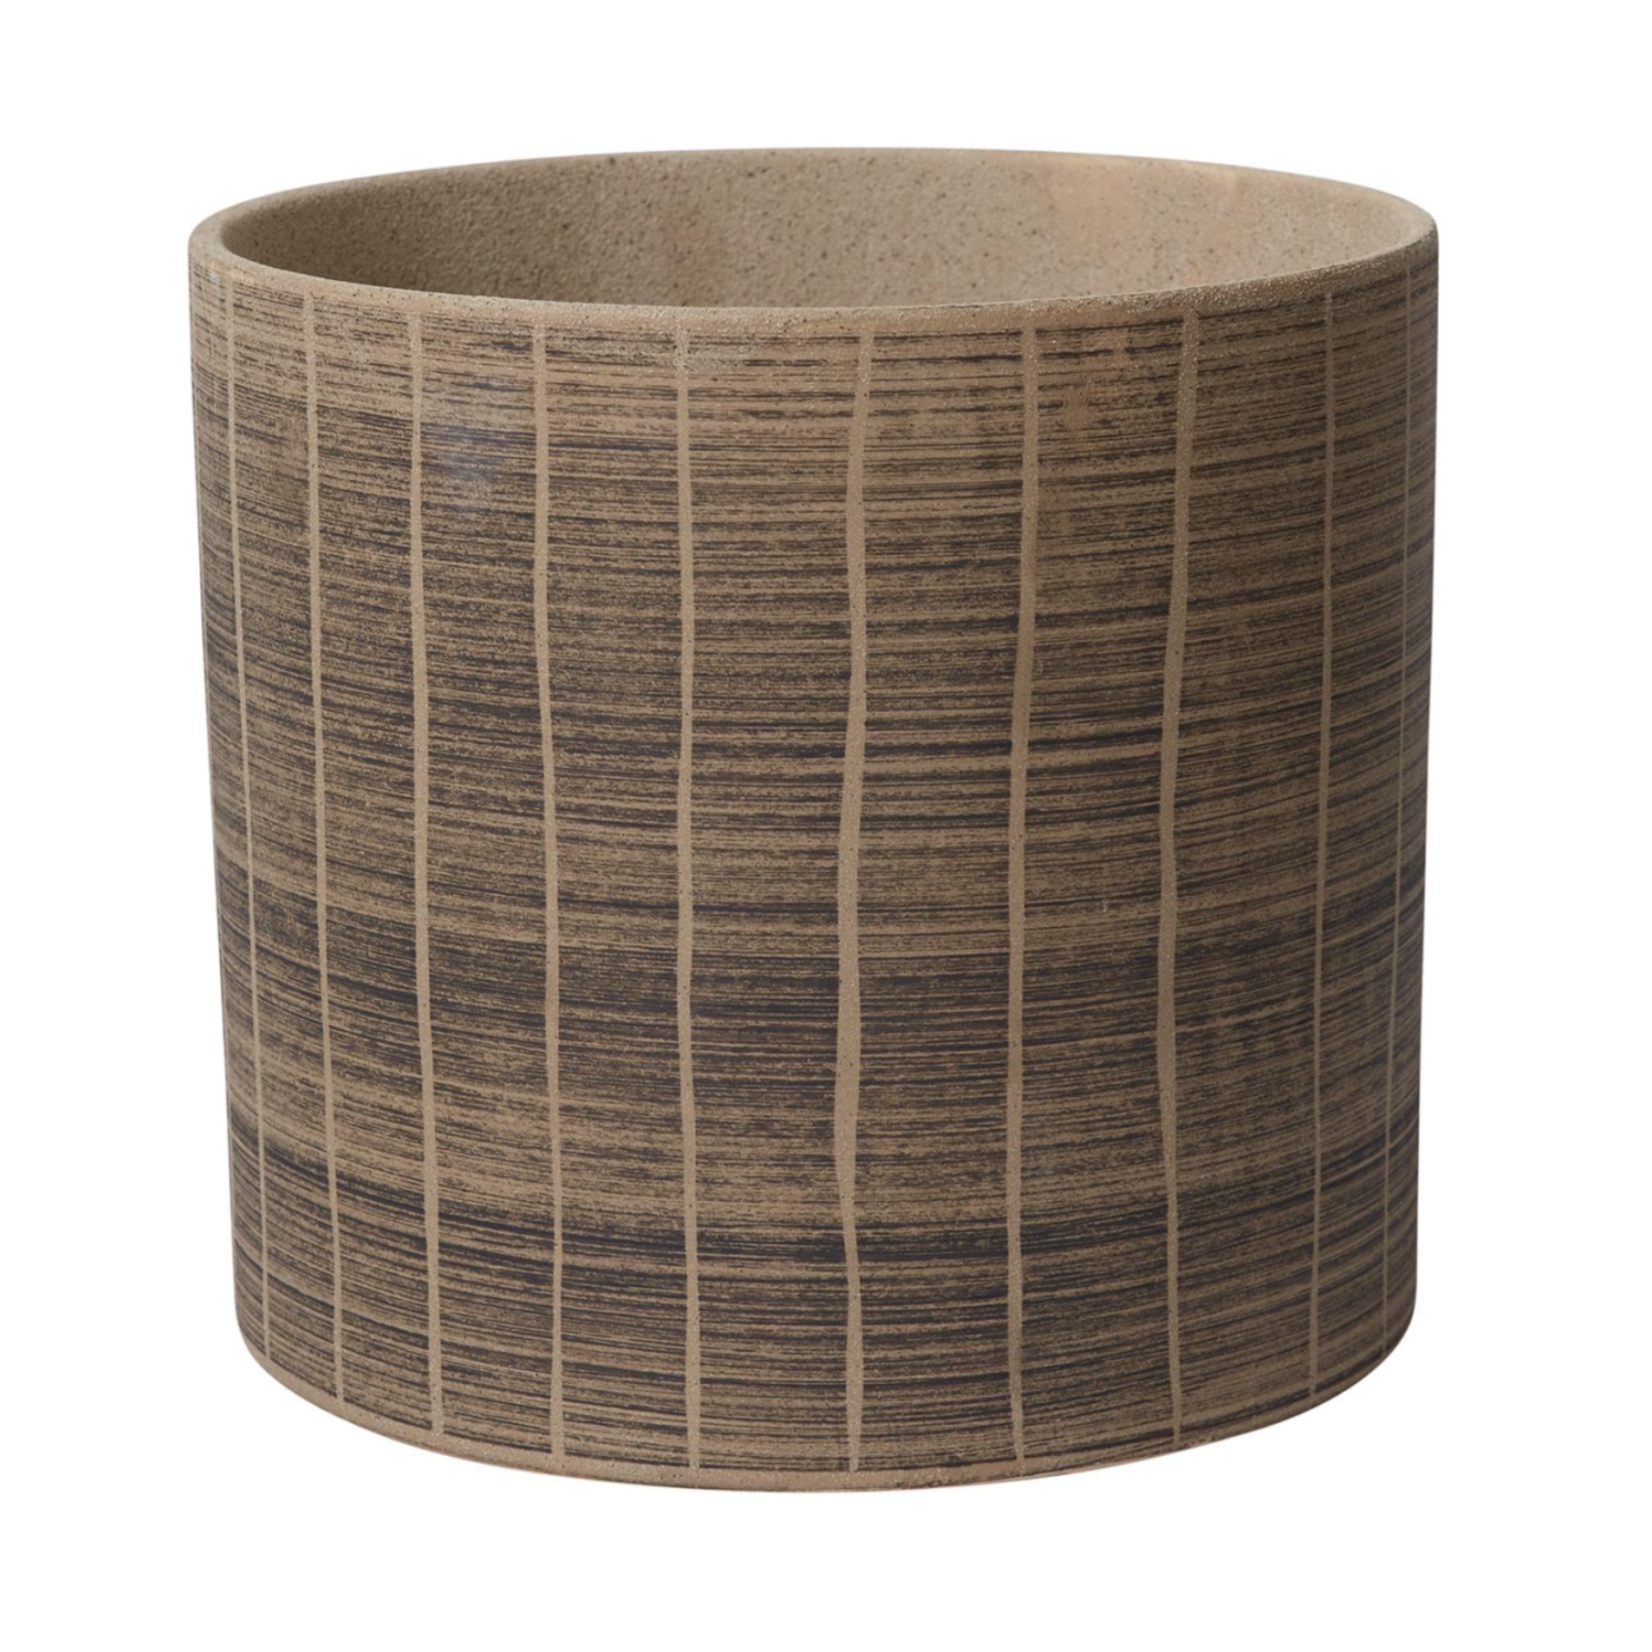 50% off was $45 now $22.50, 9.25"H X 10" TAN/BROWN STACCATO CERAMIC POT